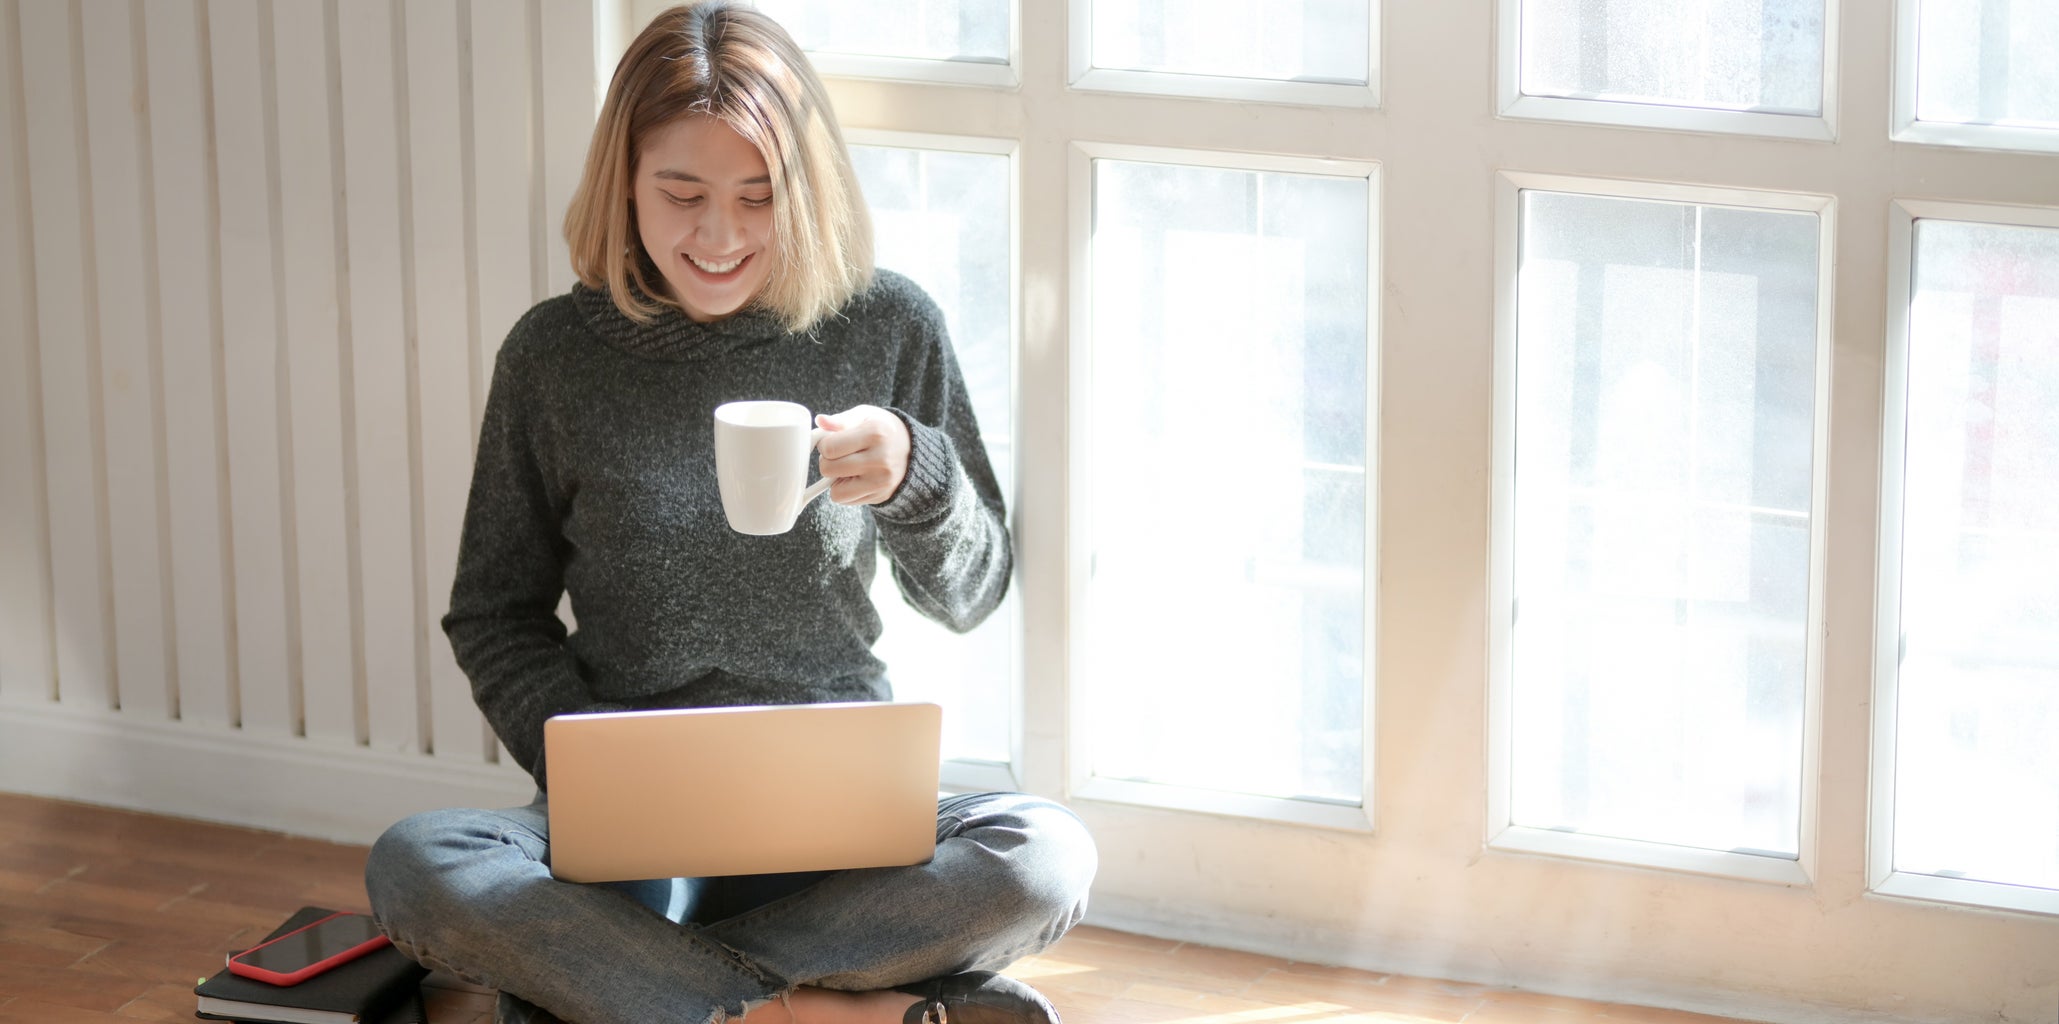 Woman sitting at computer drinking coffee